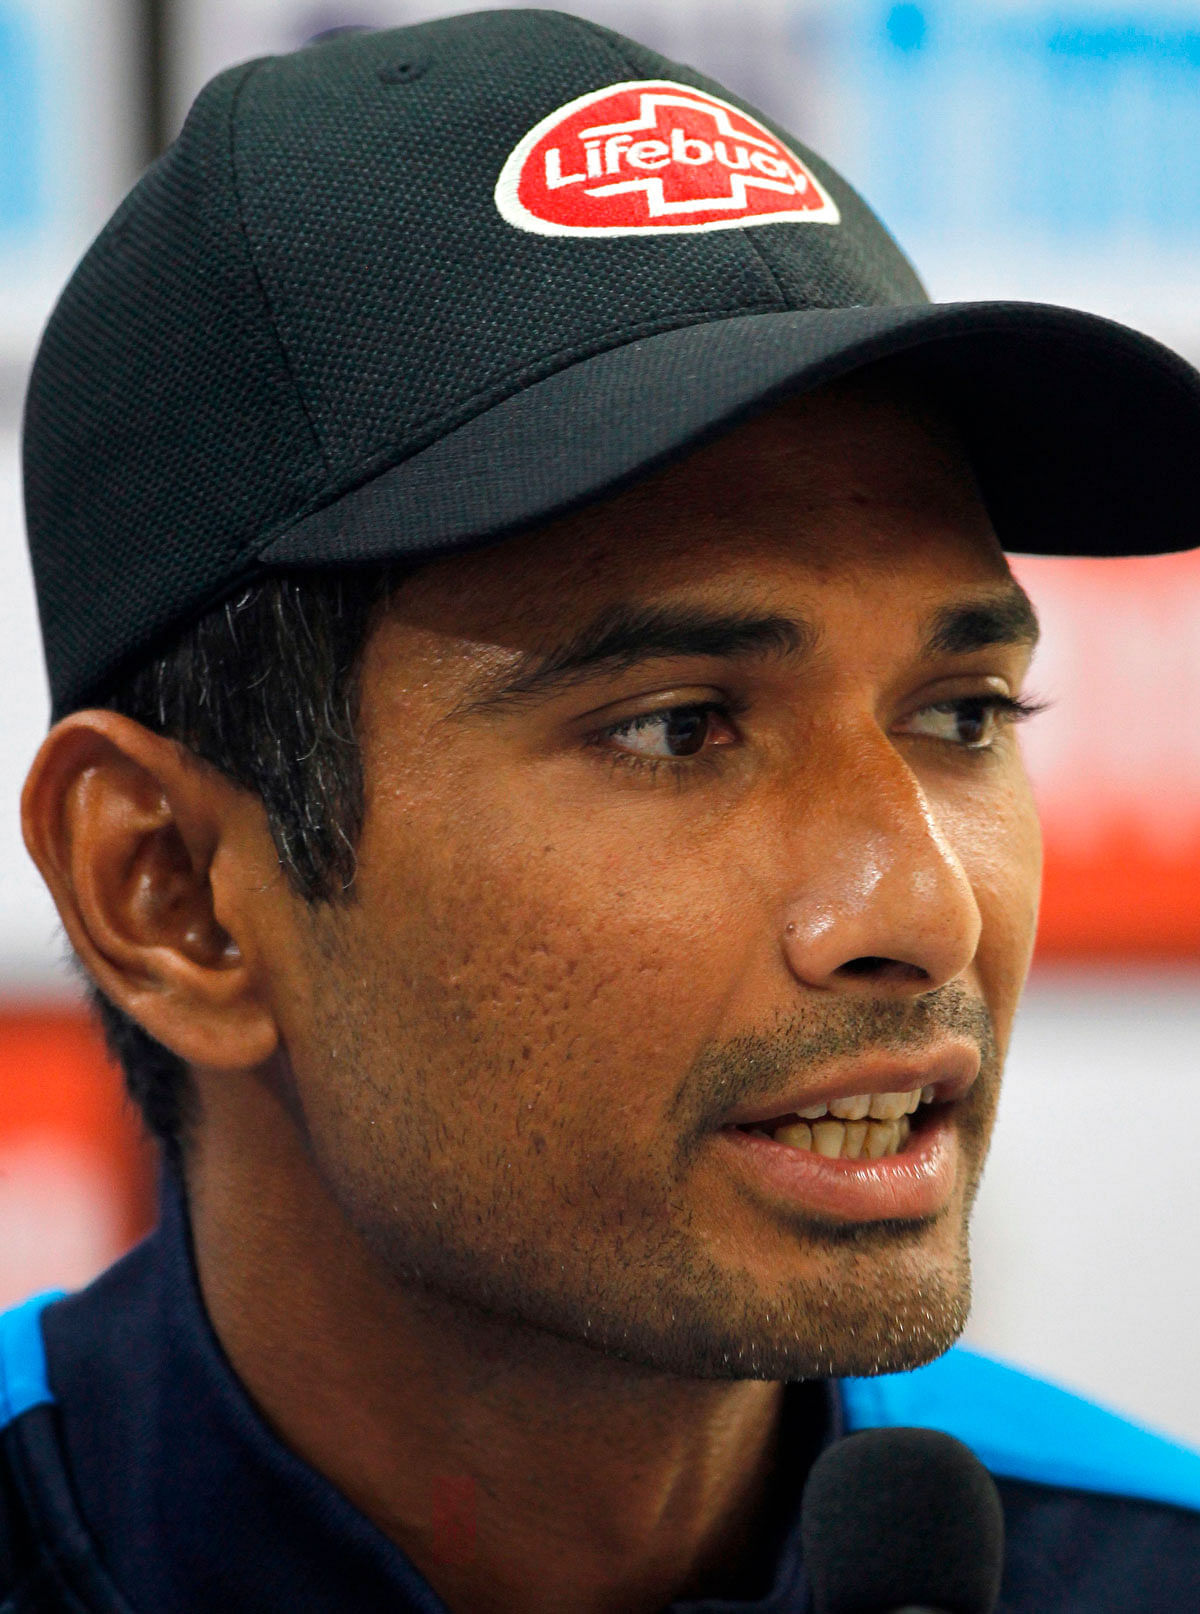 Bangladesh`s cricket team captain Mahmudullah Riyad speaks during a press conference at the Arun Jaitley Stadium in New Delhi on 2 November, 2019, ahead of the first T20 international cricket match of a three-match series between Bangladesh and India. Photo: AFP